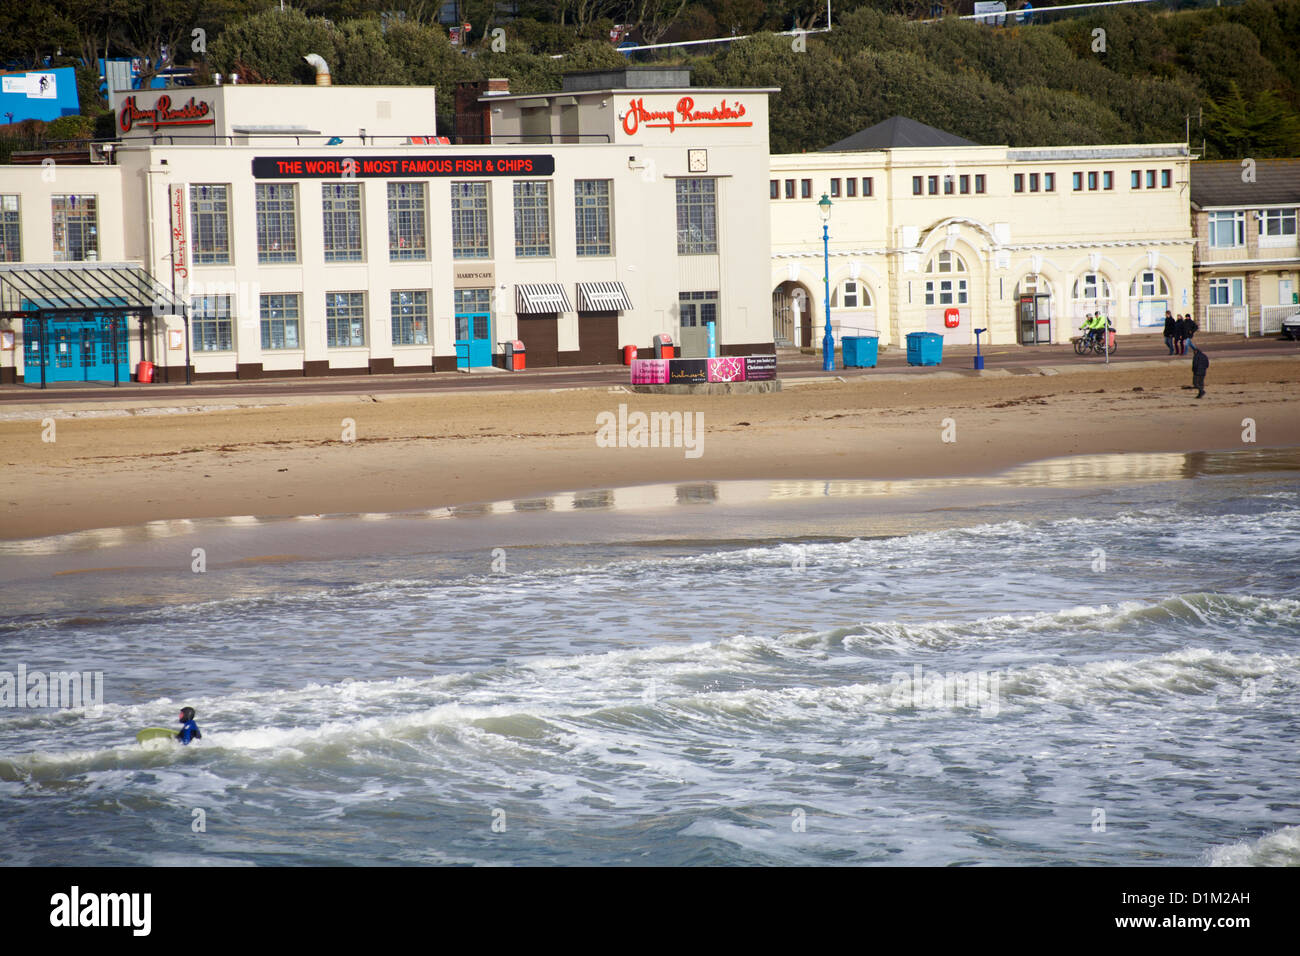 Harry Ramsden's the worlds most famous fish & chips at Bournemouth beach on Christmas day Stock Photo